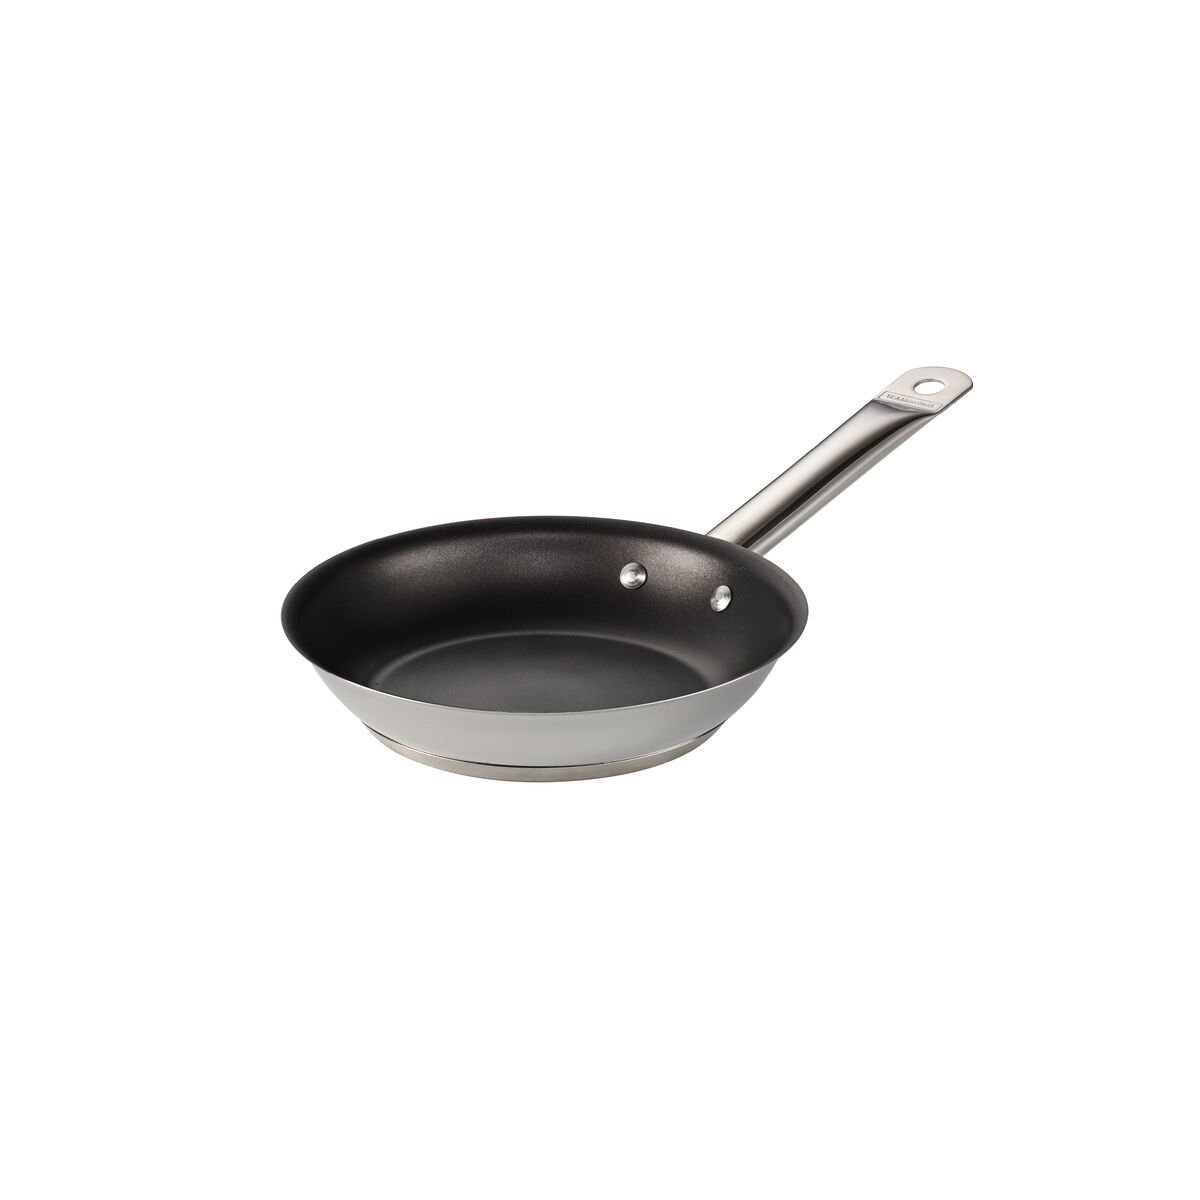 Tramontina Fry Pan Stainless Steel Try-Ply Clad 8-in, 80116/004DS